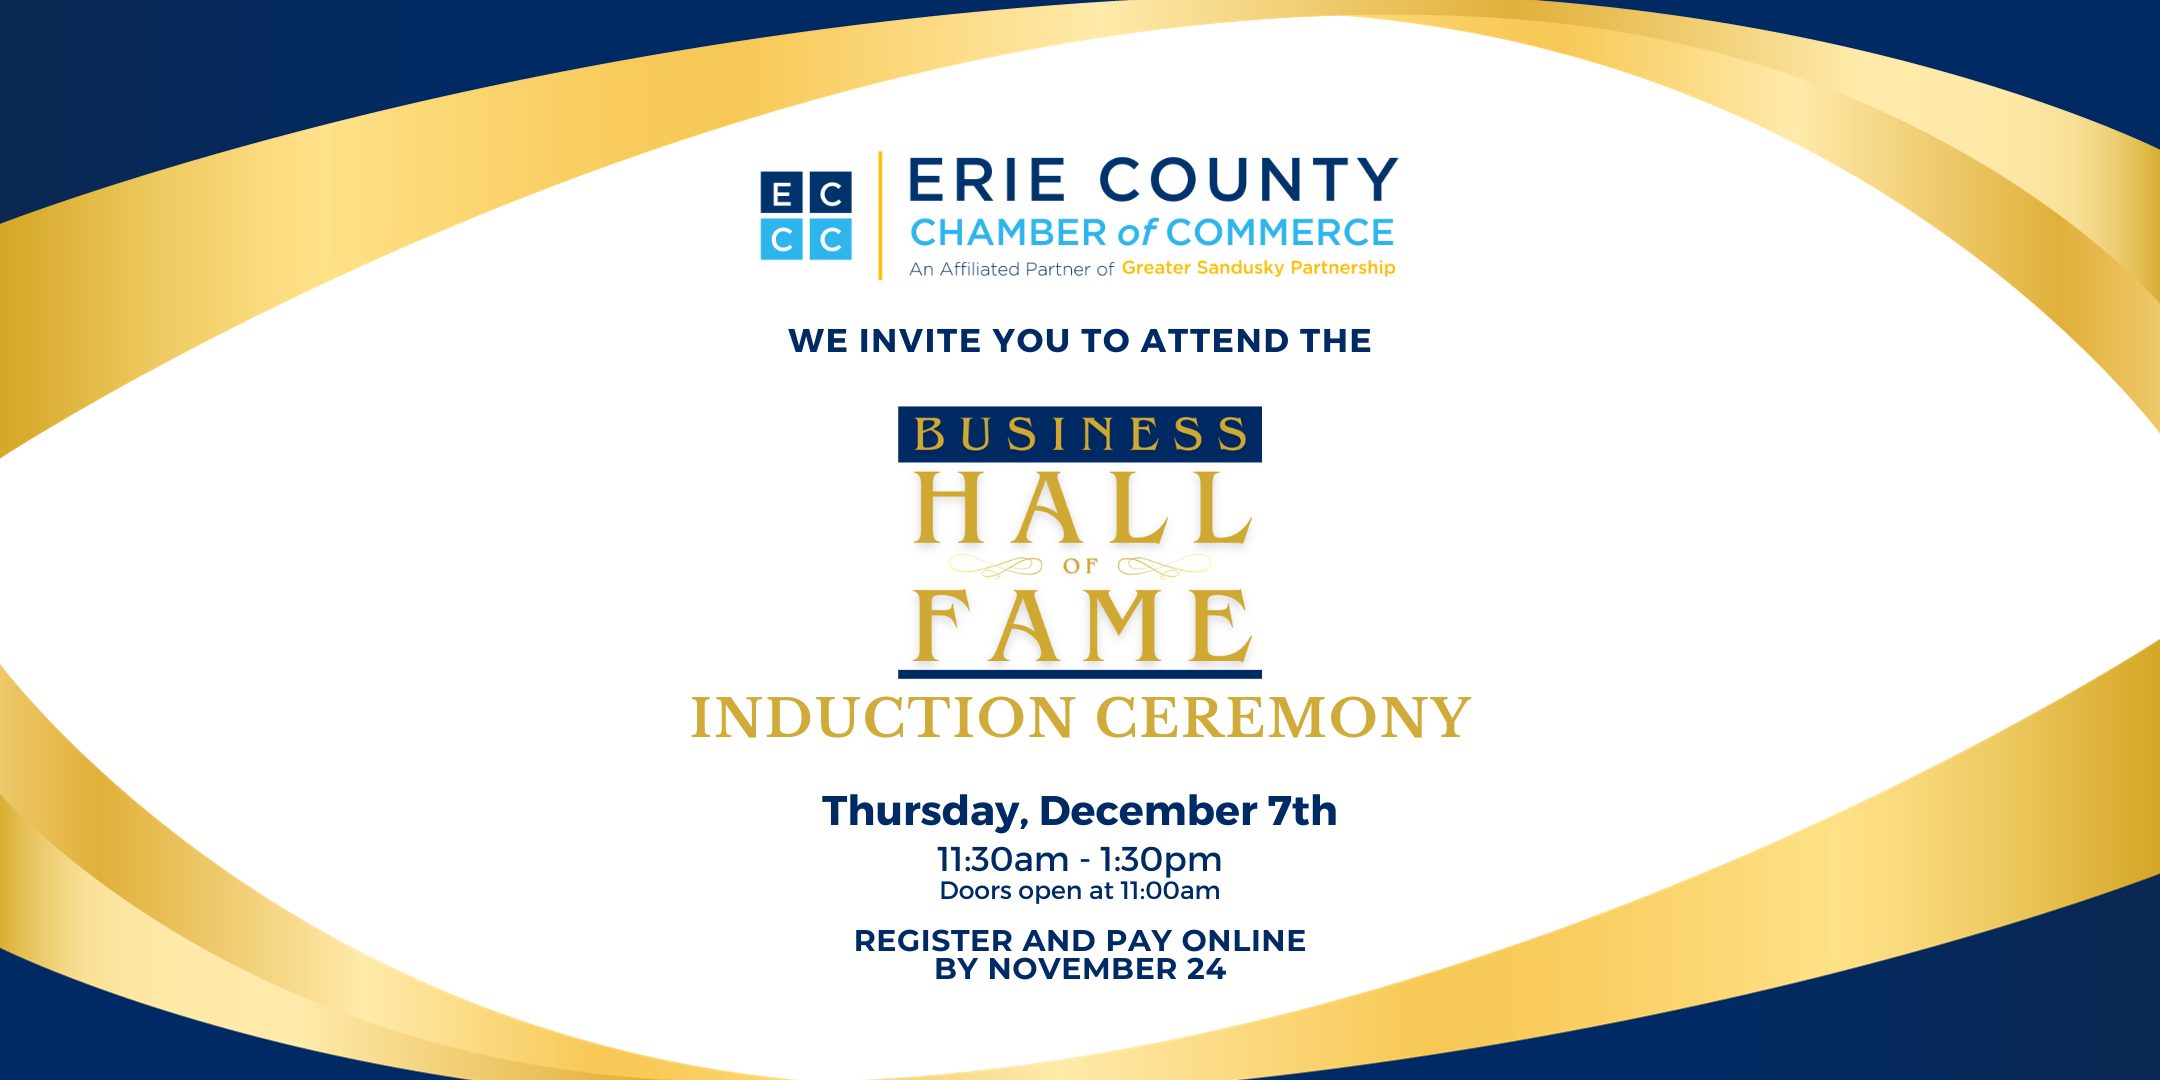 Erie County Chamber of Commerce Business Hall of Fame Induction Ceremony Eventbrite